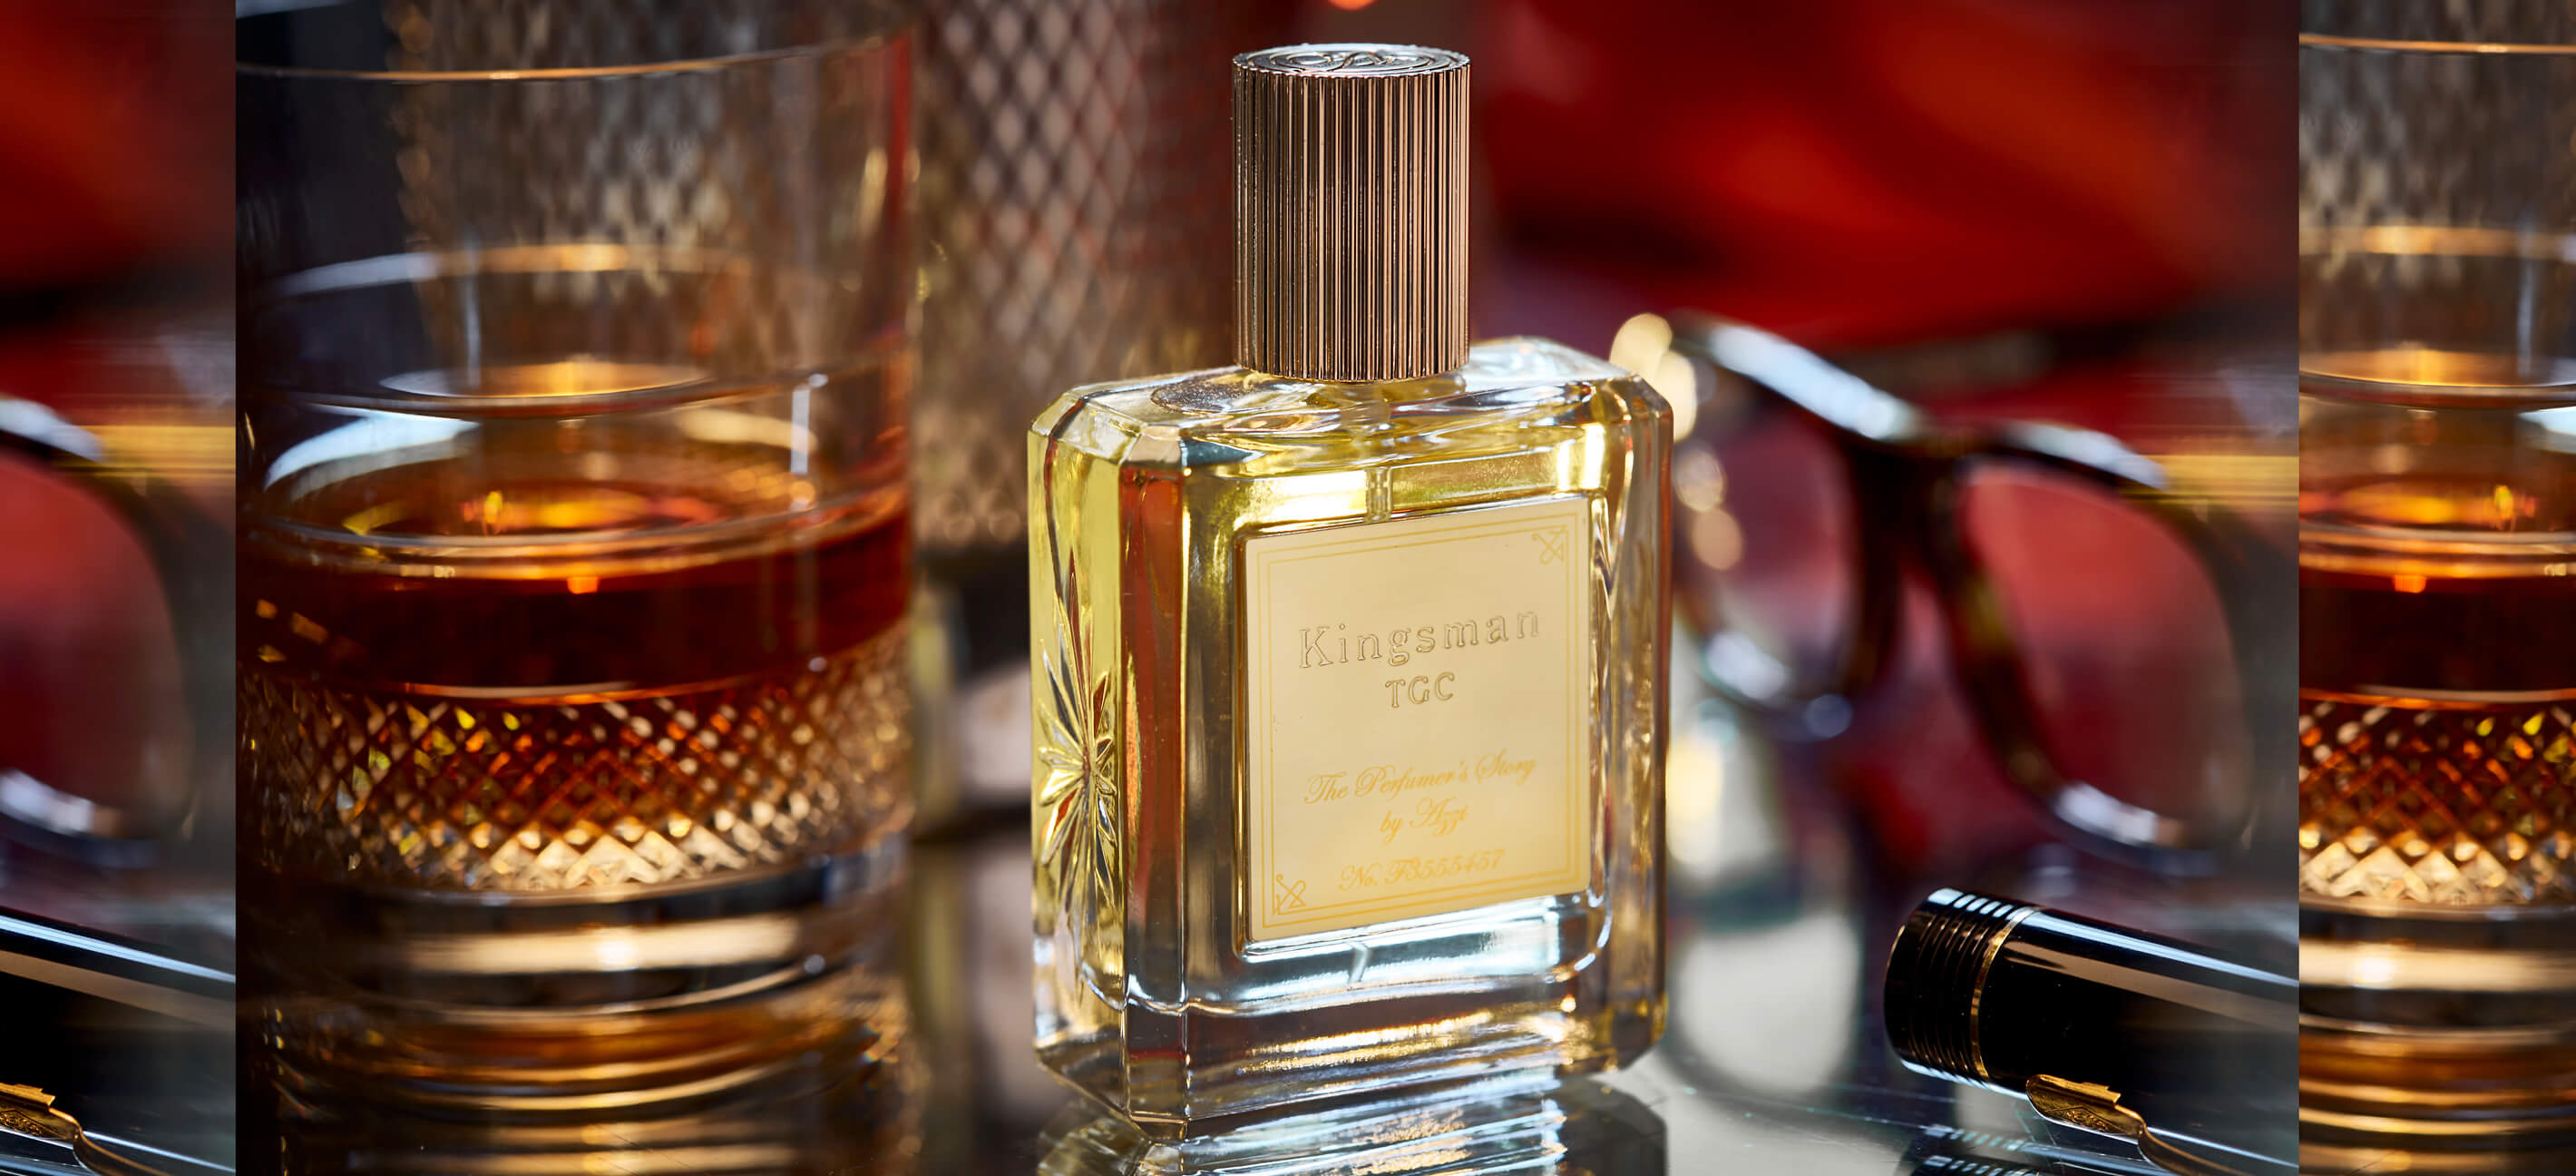 The Perfumer's Story by Azzi - From perfume designer Azzi Glasser.